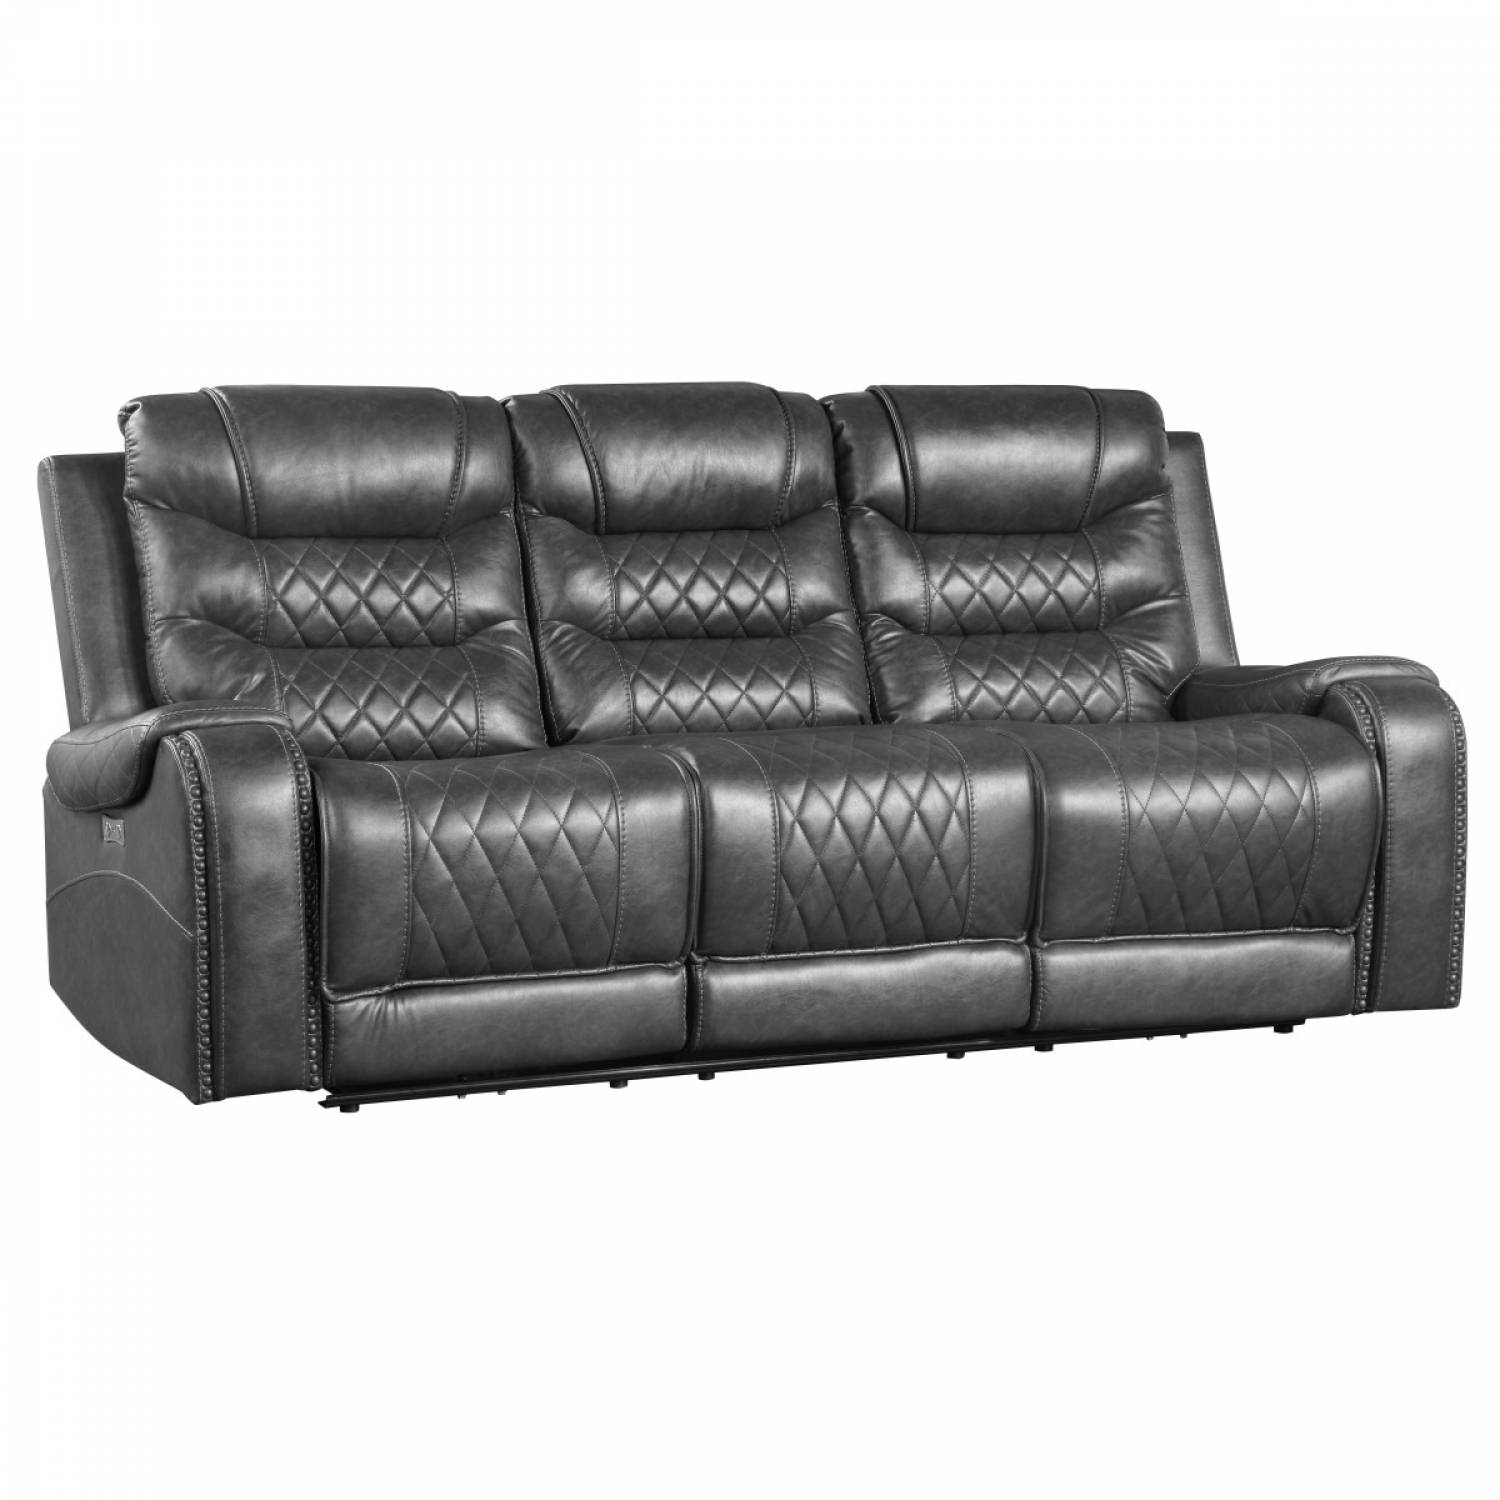 9405gy 3pw Power Double Reclining Sofa, Grey Reclining Sofa With Cup Holders